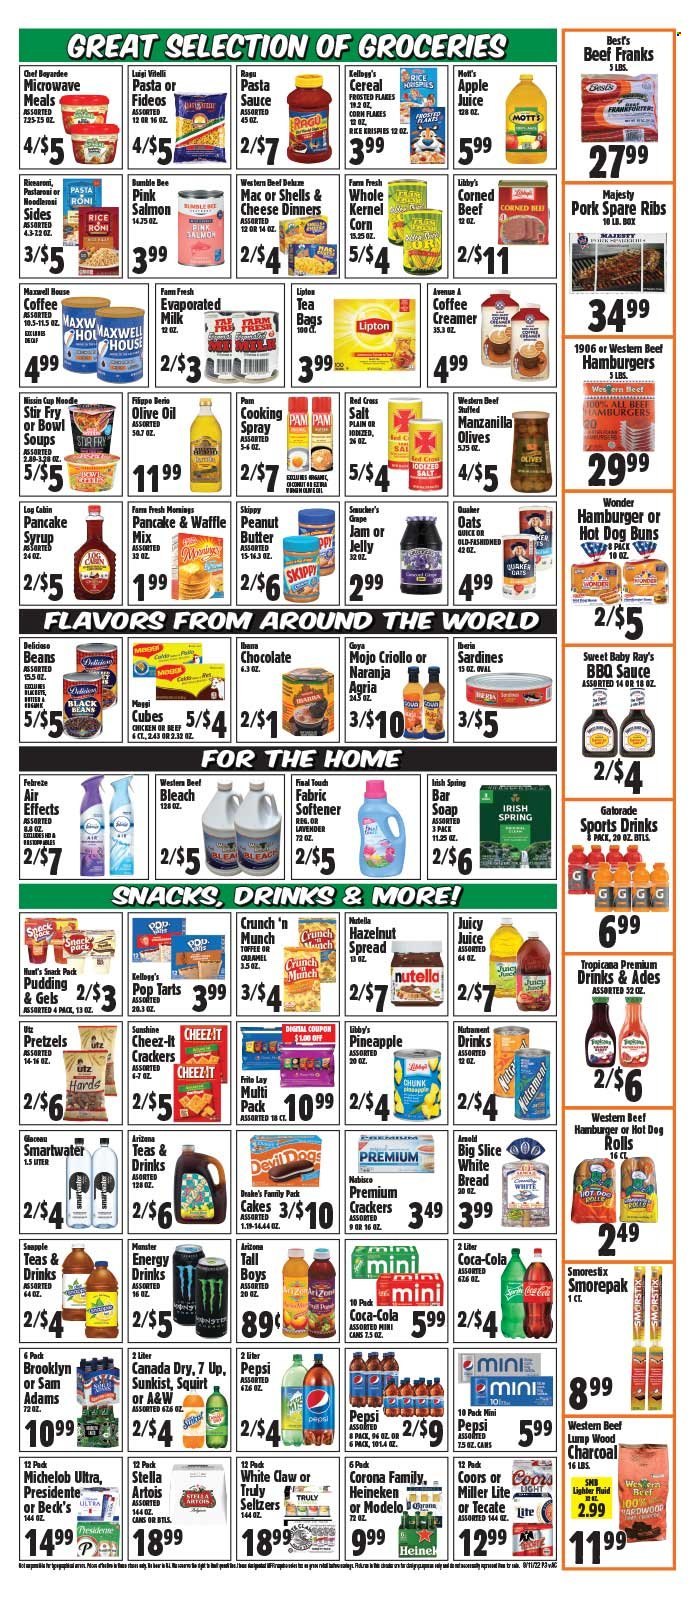 thumbnail - Western Beef Flyer - 08/11/2022 - 08/17/2022 - Sales products - bread, white bread, hot dog rolls, pretzels, buns, corn, pineapple, Mott's, beef meat, pork meat, pork ribs, pork spare ribs, salmon, sardines, pasta sauce, Bumble Bee, sauce, Quaker, noodles, Nissin, ragú pasta, pudding, evaporated milk, Sunshine, creamer, Nutella, chocolate, toffee, jelly, crackers, Kellogg's, Pop-Tarts, Cheez-It, oats, corned beef, olives, Goya, Chef Boyardee, cereals, corn flakes, Rice Krispies, Frosted Flakes, BBQ sauce, ragu, olive oil, oil, fruit jam, peanut butter, pancake syrup, syrup, apple juice, Canada Dry, Coca-Cola, Pepsi, juice, energy drink, Lipton, 7UP, AriZona, A&W, Gatorade, Smartwater, Maxwell House, tea bags, White Claw, TRULY, beer, Corona Extra, Heineken, Beck's, Febreze, bleach, fabric softener, Fab, soap bar, soap, Miller Lite, Stella Artois, Coors, Michelob. Page 3.